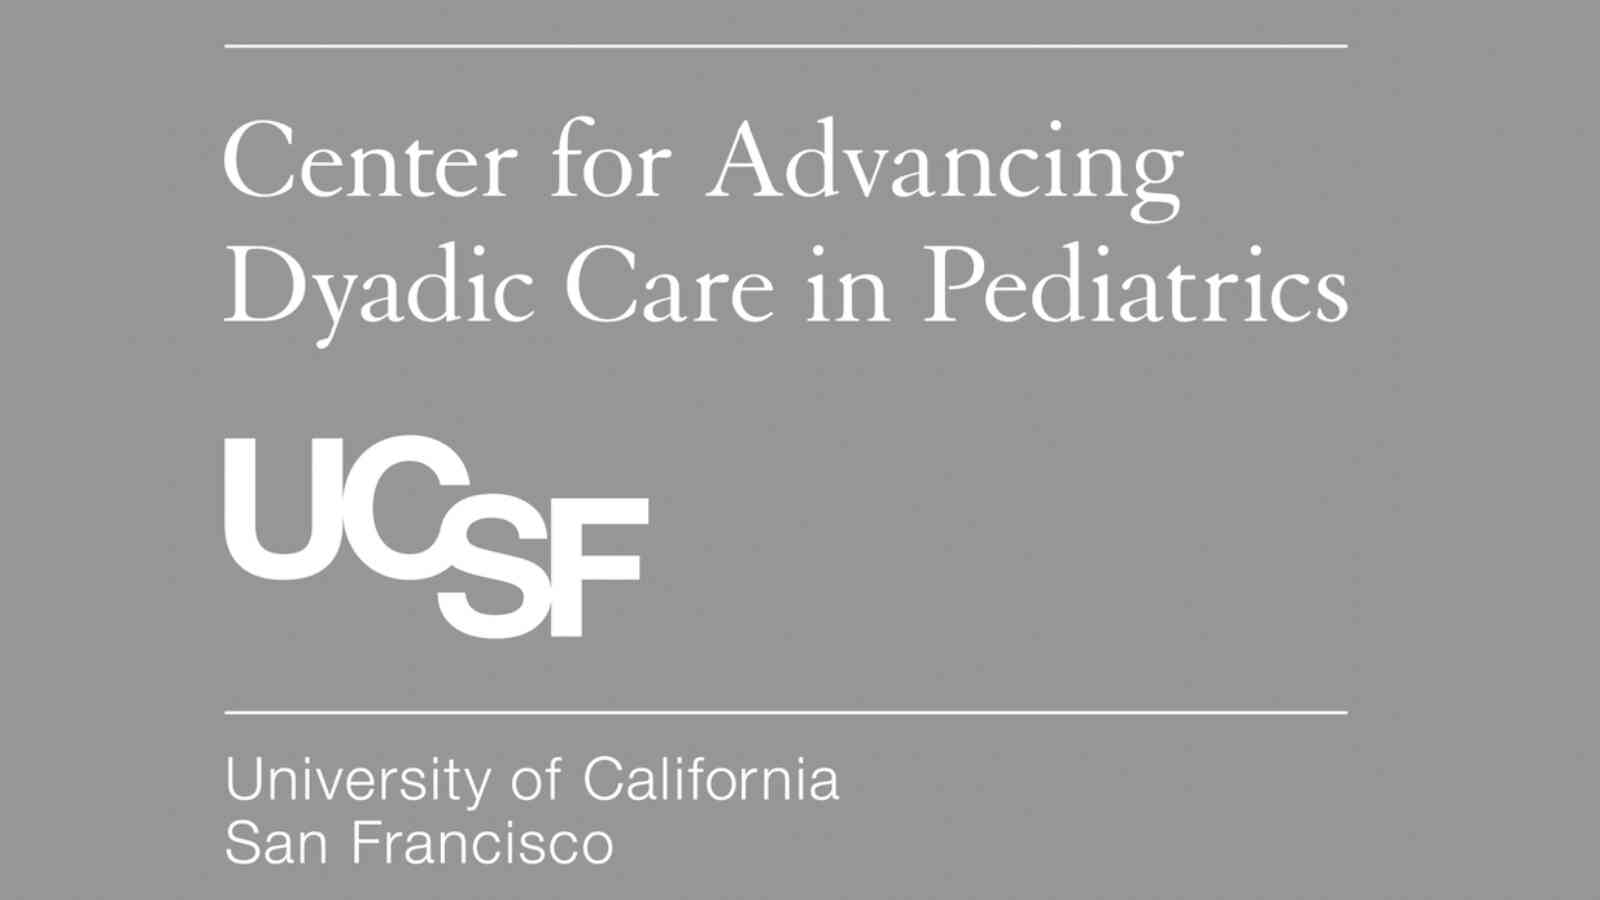 In white text, the image shows a logo that says Center for Advancing Dyadic Care in Pediatrics. Underneath in white text, it says UCSF University of California San Francisco. The background color is a medium grey